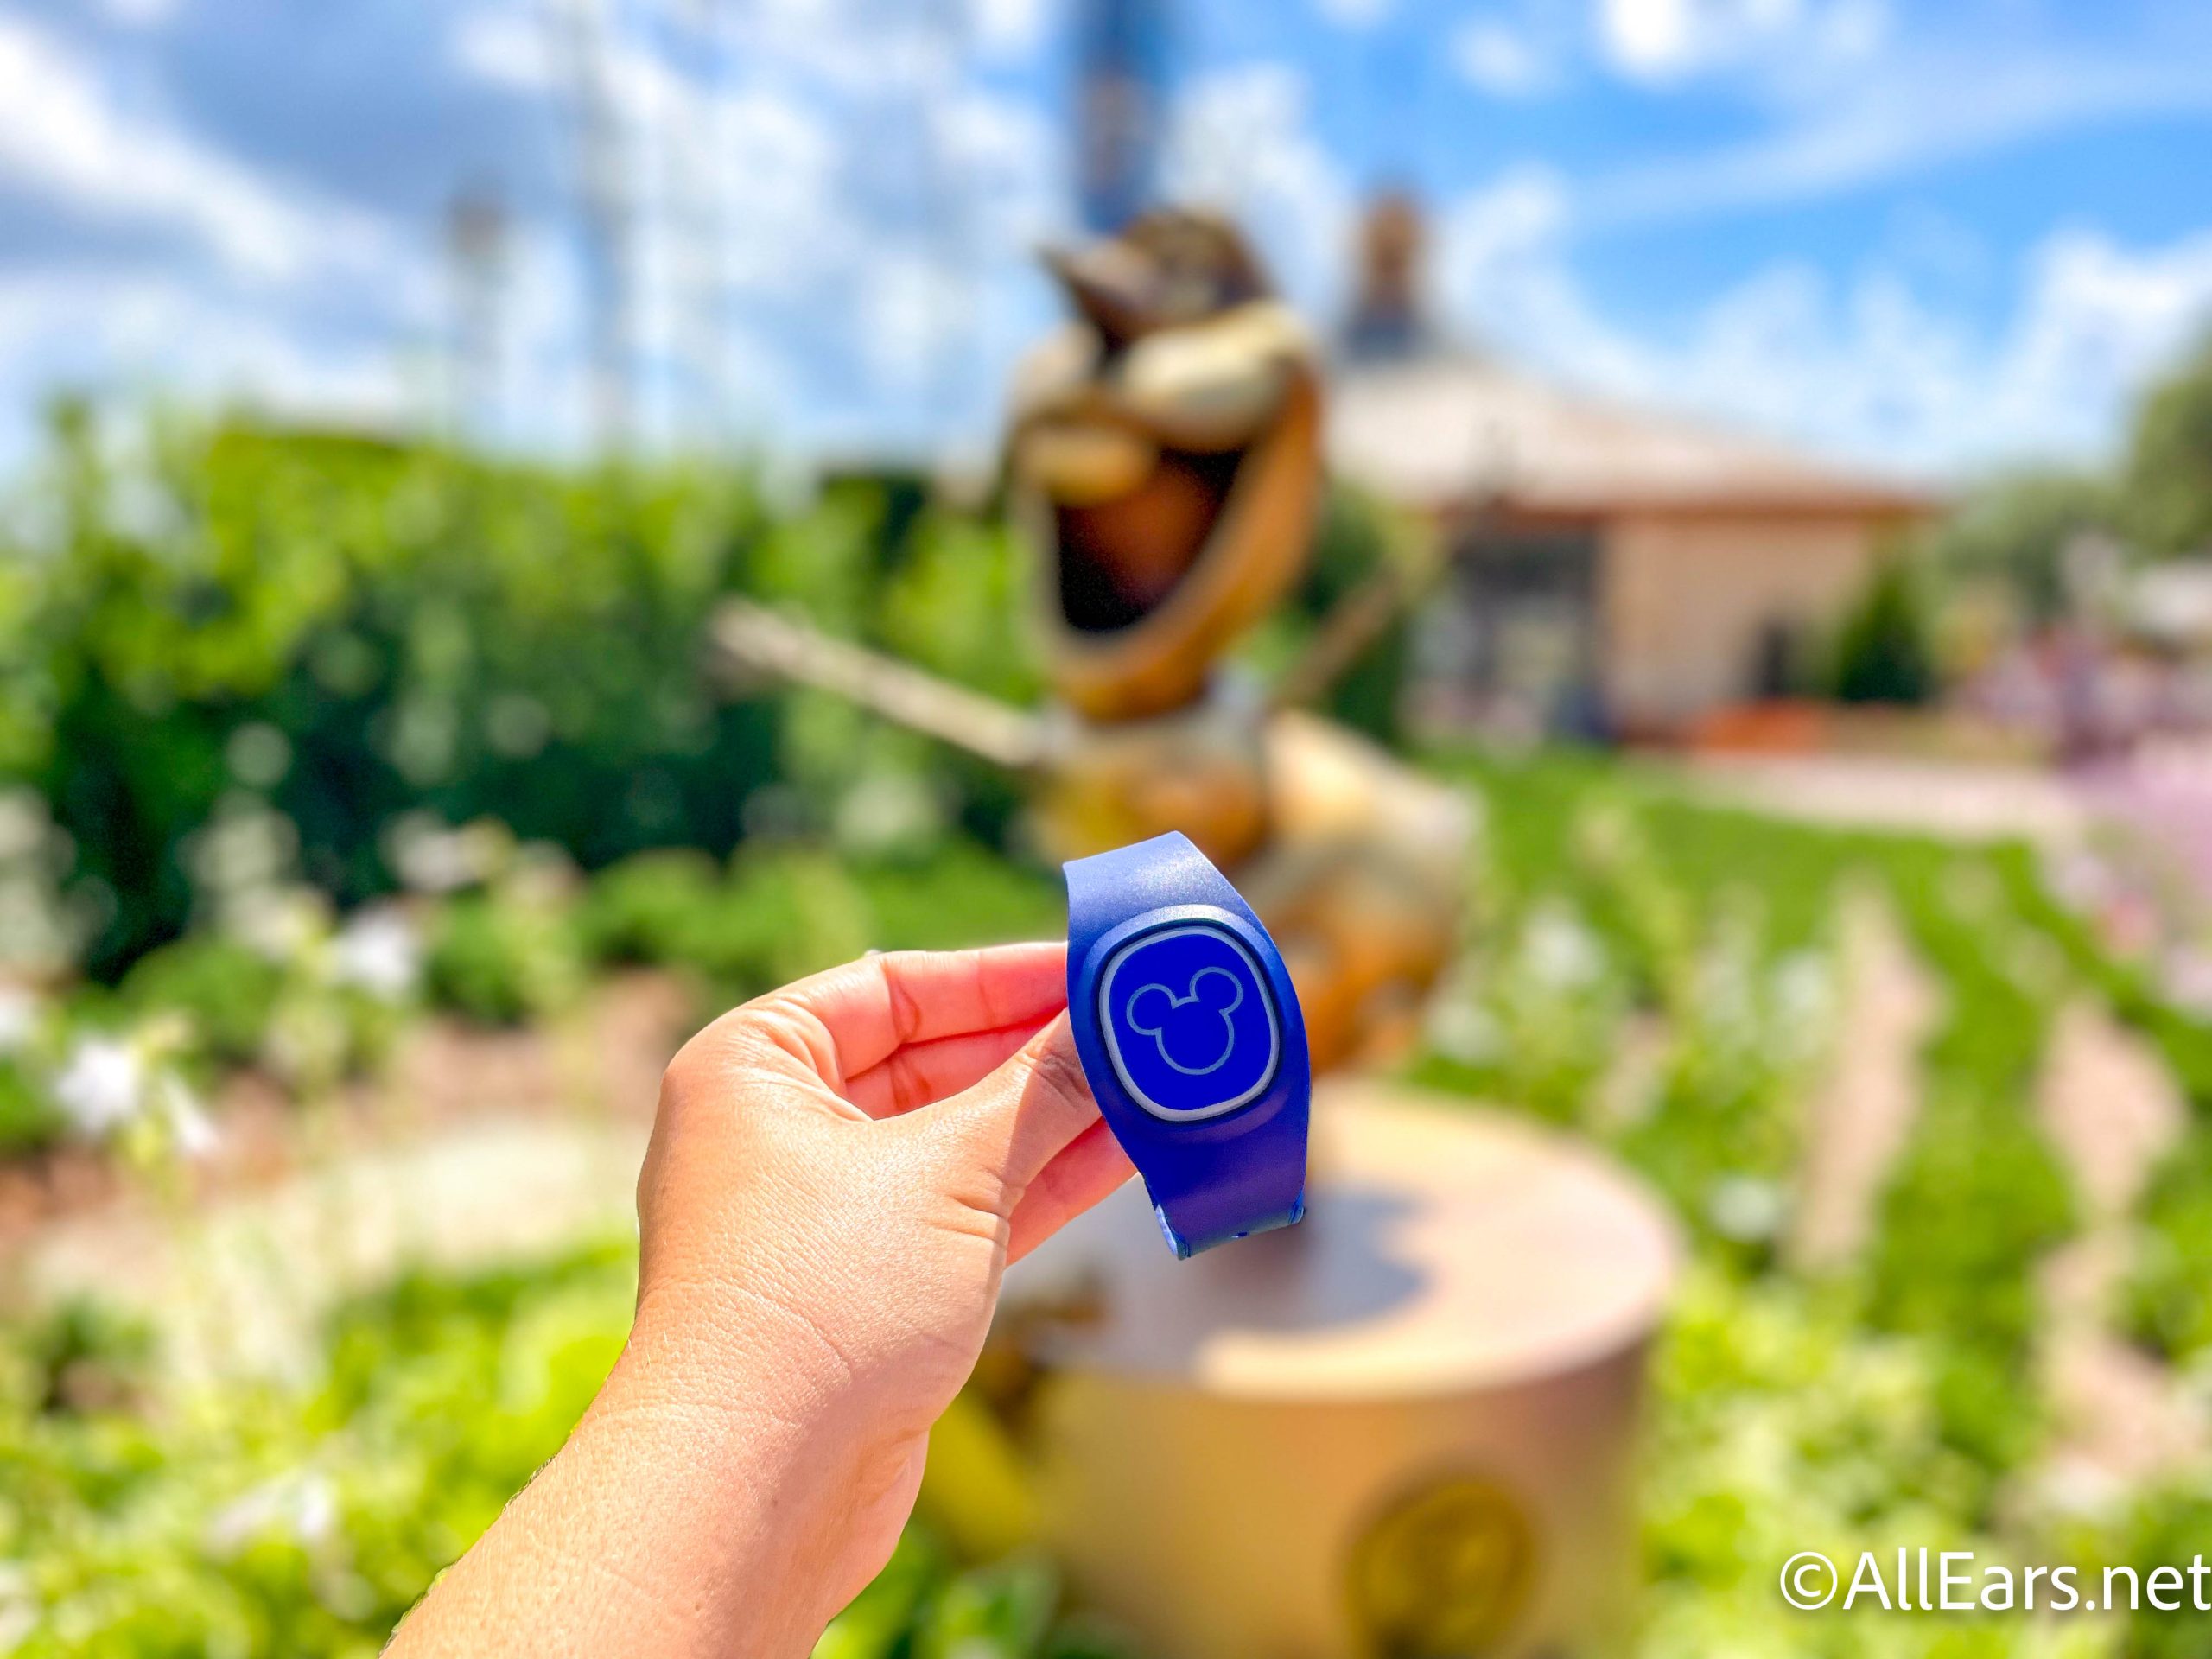 https://allears.net/wp-content/uploads/2022/05/wdw-2022-epcot-magicband-plus-new-design-size-comparison-scaled.jpg